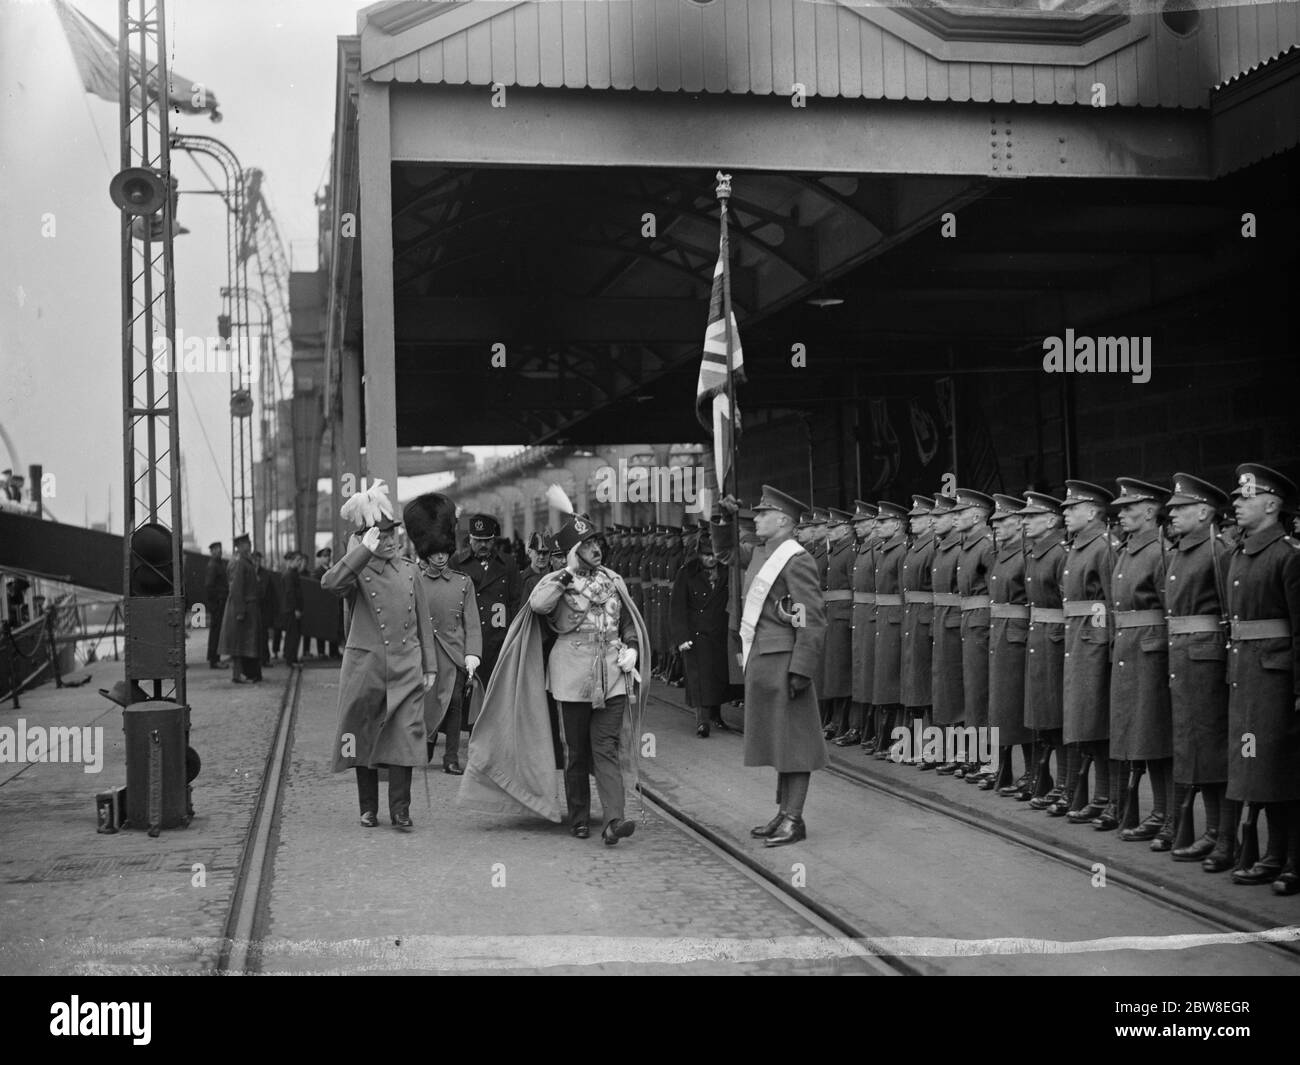 A welcome at the gate of England . King Amanullah of Afghanistan and his beautiful consort Queen Souriya , were welcomed at Dover by the Prince of Wales and a great crowd of Britons who cheered them warmly . The King with the Prince of Wales inspecting the Guard of Honour on arrival at Dover . 13 March 1928 Stock Photo